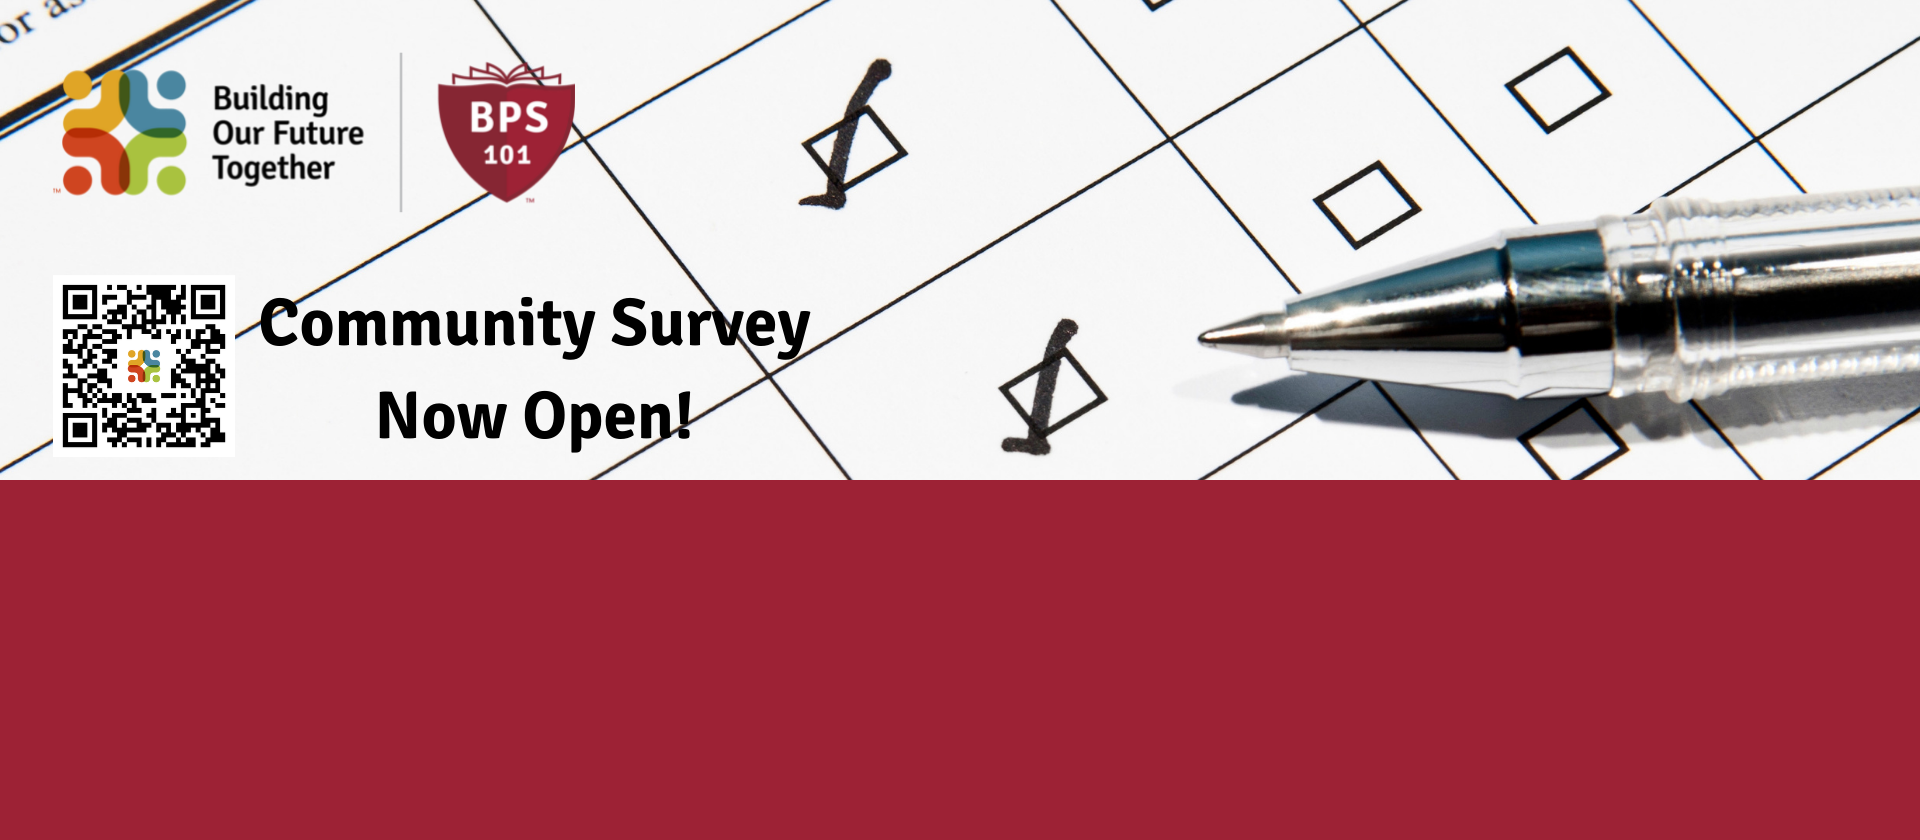 <h2>Building Our Future Together</h2>
<p class="p2"><span class="s1">The Community Survey is open until May 14th. Help us shape the future of Batavia&#8217;s schools!</span></p>
<p>&nbsp;</p>
<a href="https://www.bps101.net/boft/" class="button ">HERE</a>
